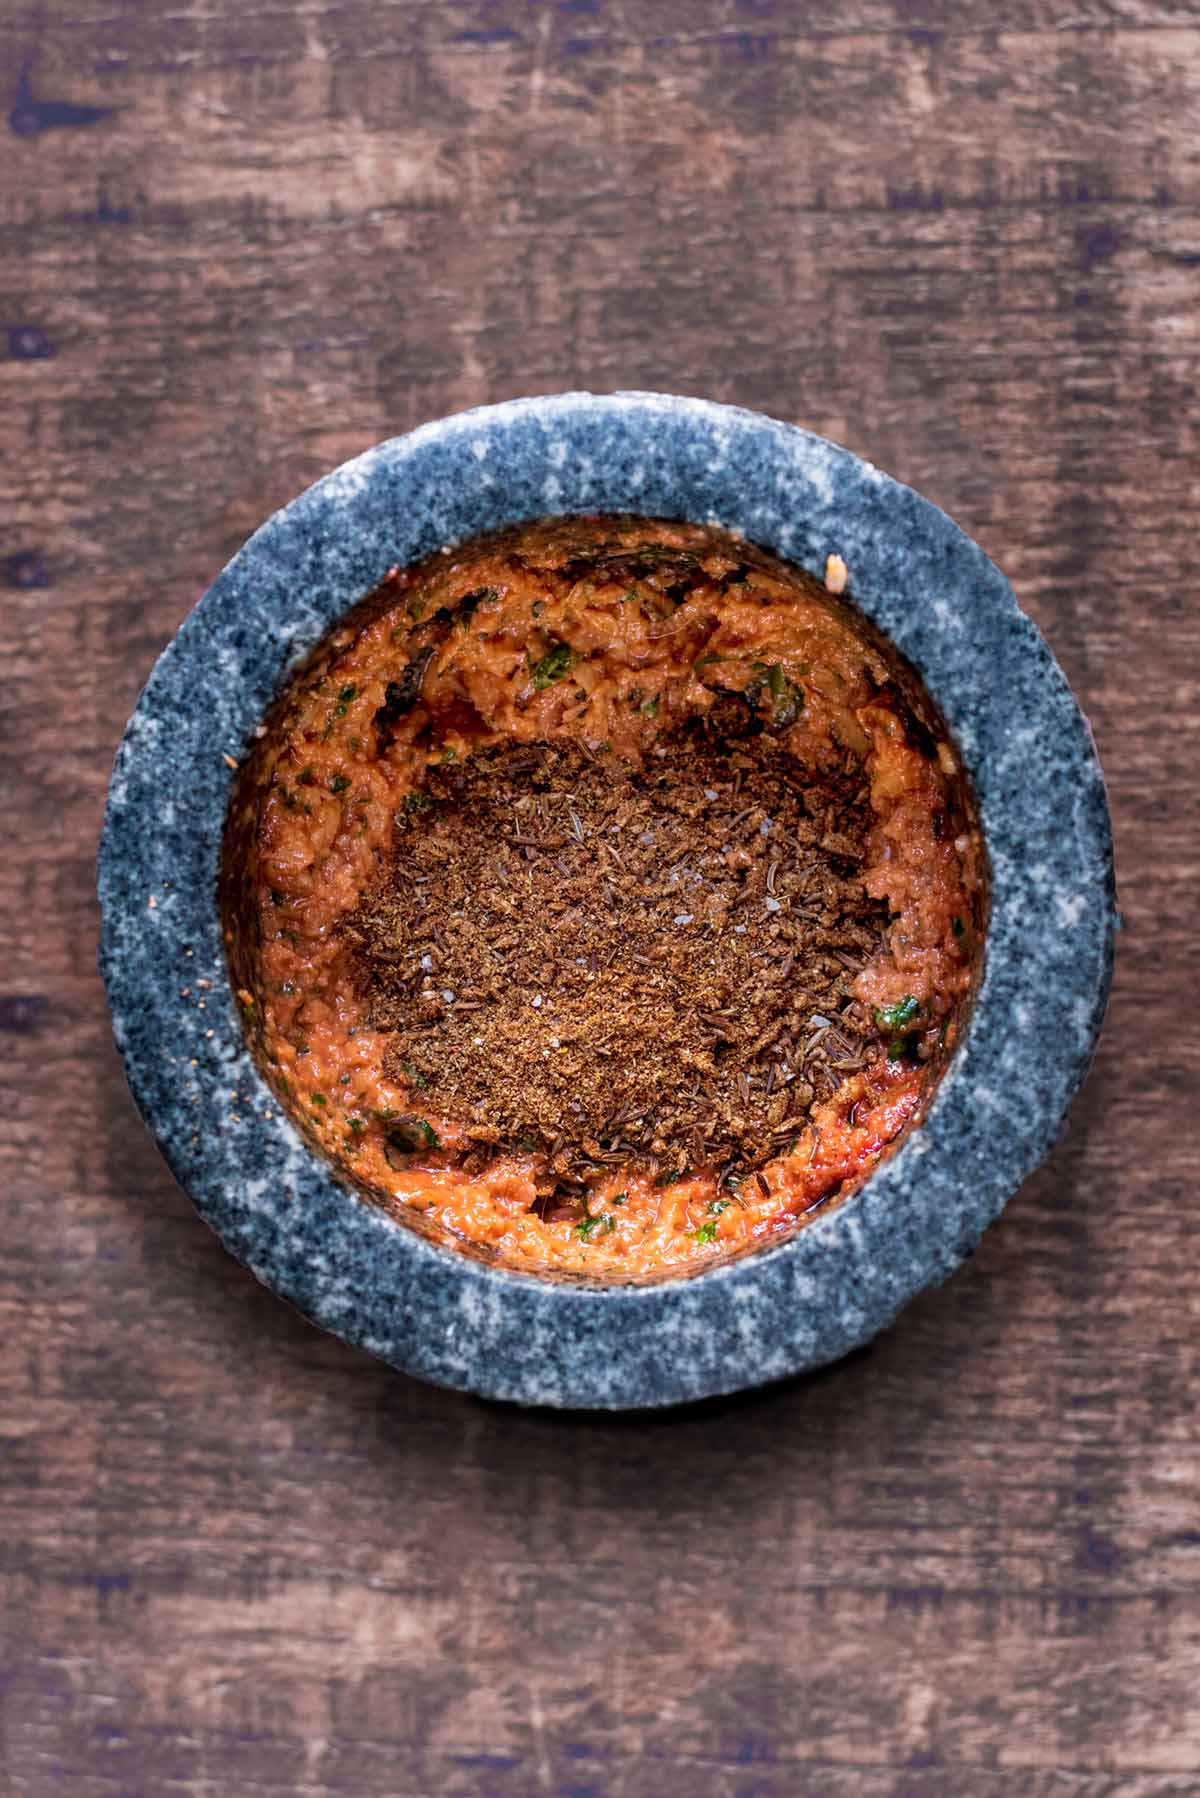 A pestle and mortar containing curry paste and spices.